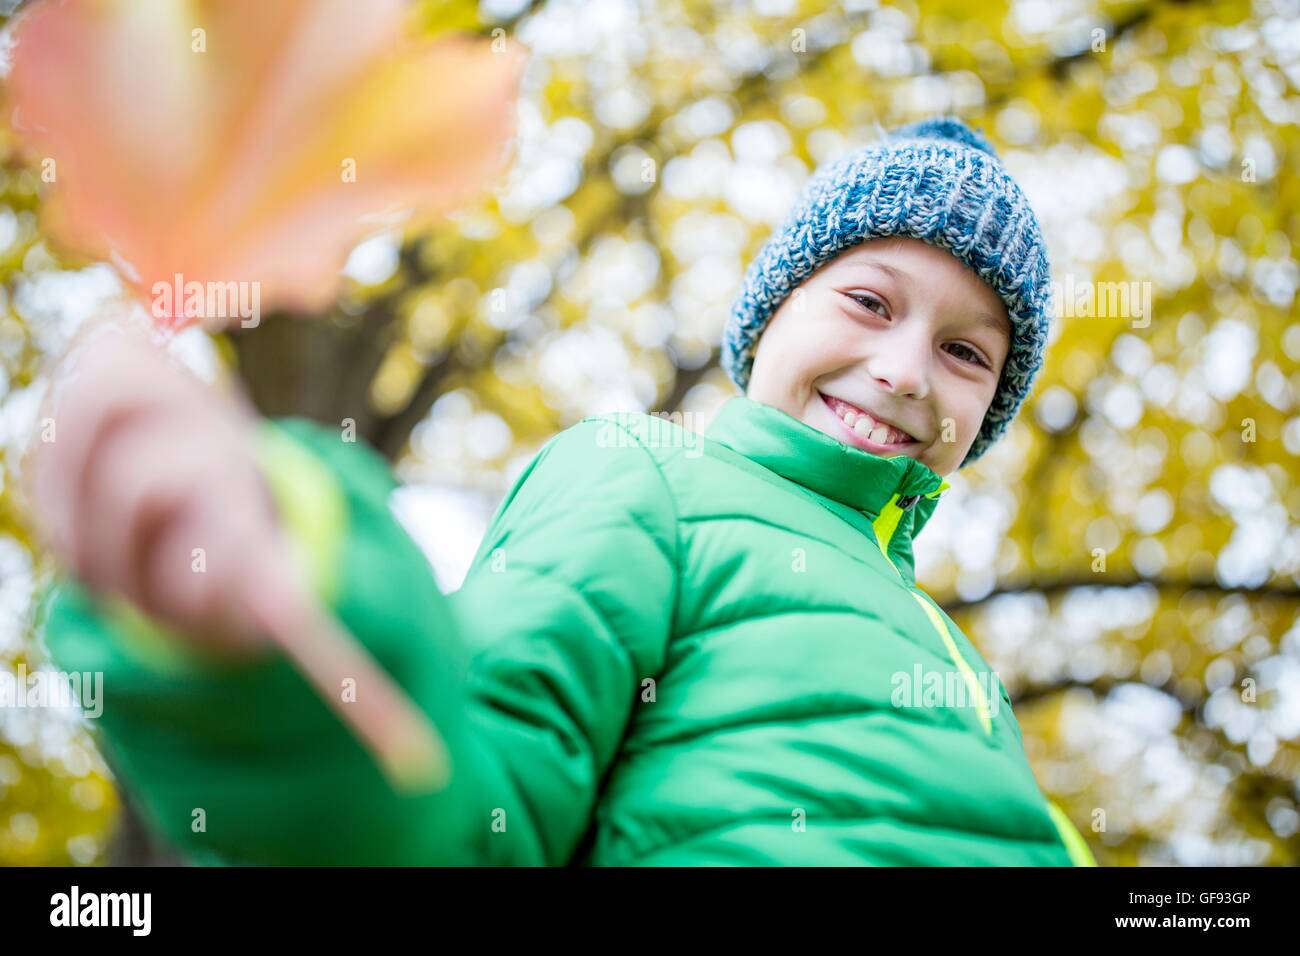 MODEL RELEASED. Smiling boy wearing woolly hat and jacket holding leaf, portrait, close-up. Stock Photo